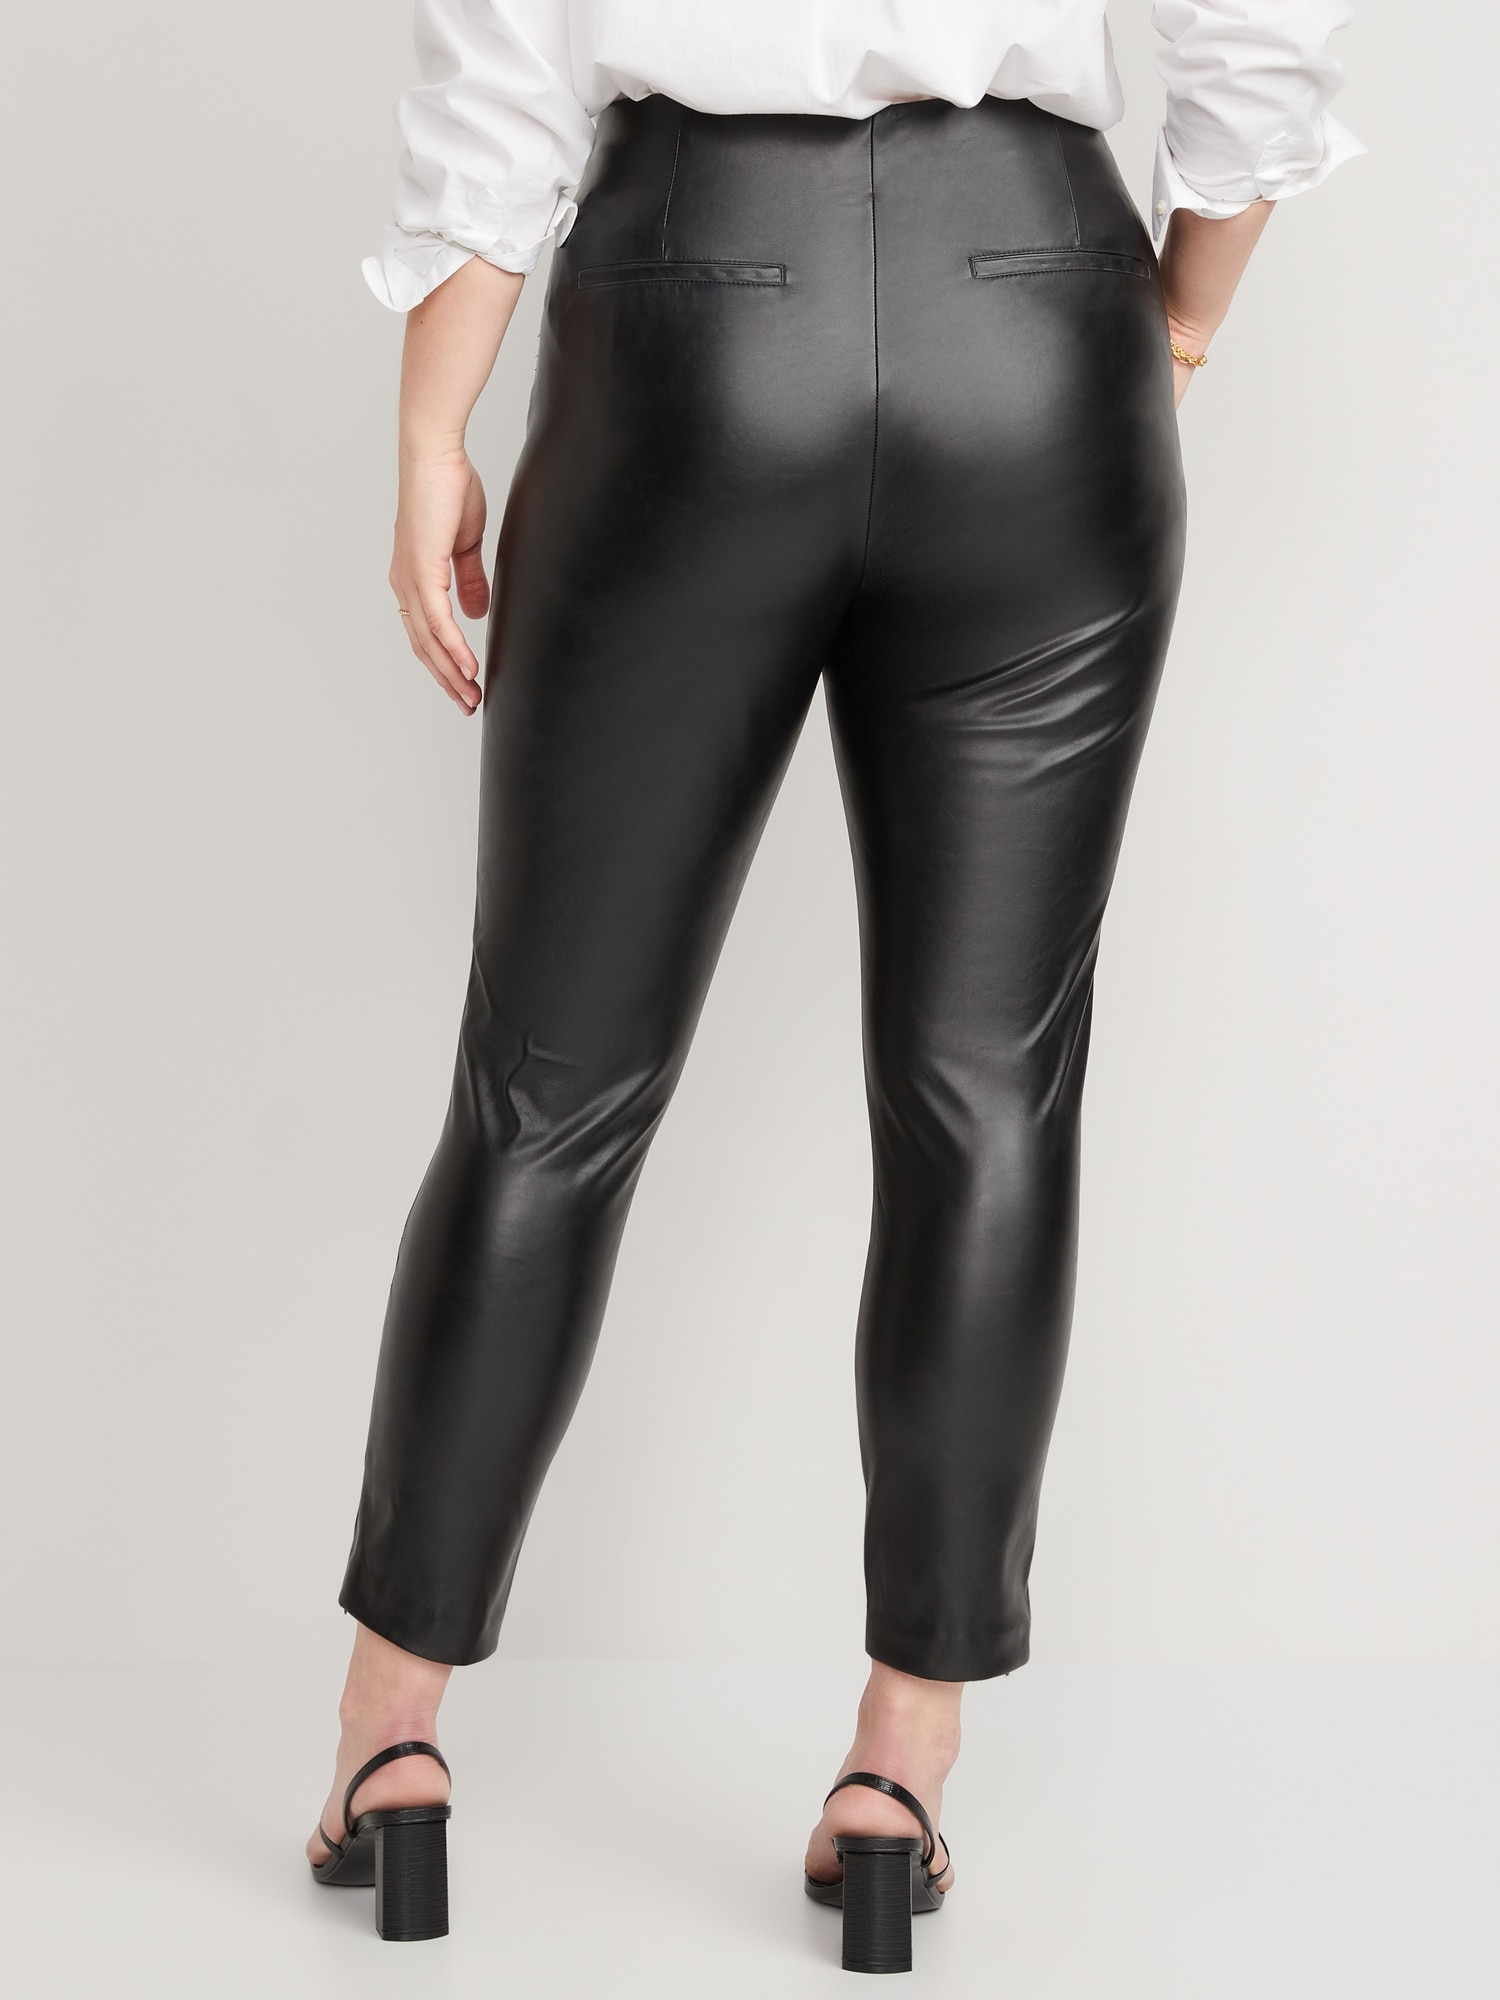 Extra High-Waisted Faux-Leather Zip Ankle Leggings for Women